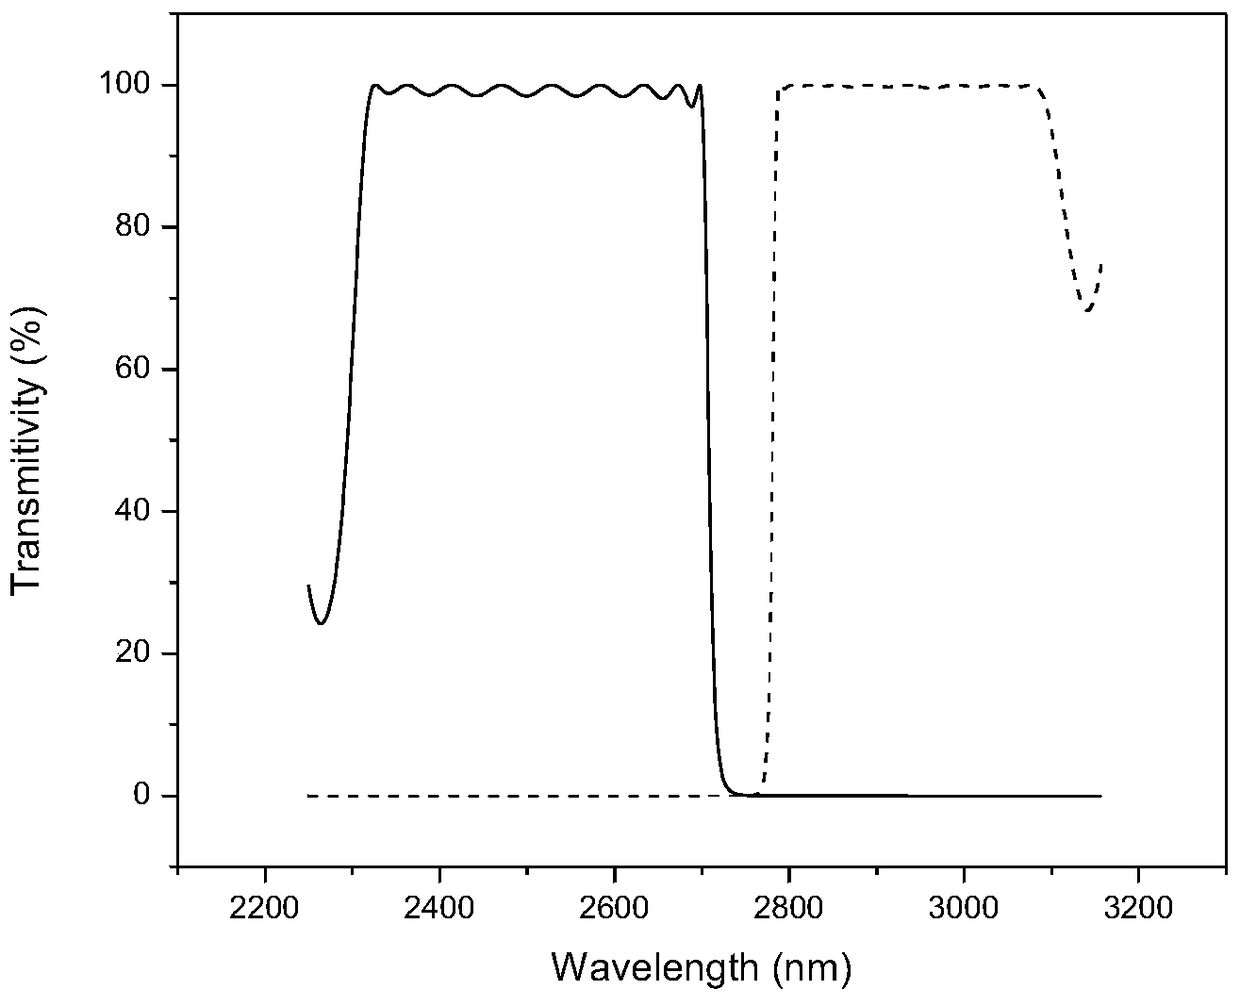 A Wavelength Selective Output Folded Unstable Cavity for Hydrogen Fluoride Laser